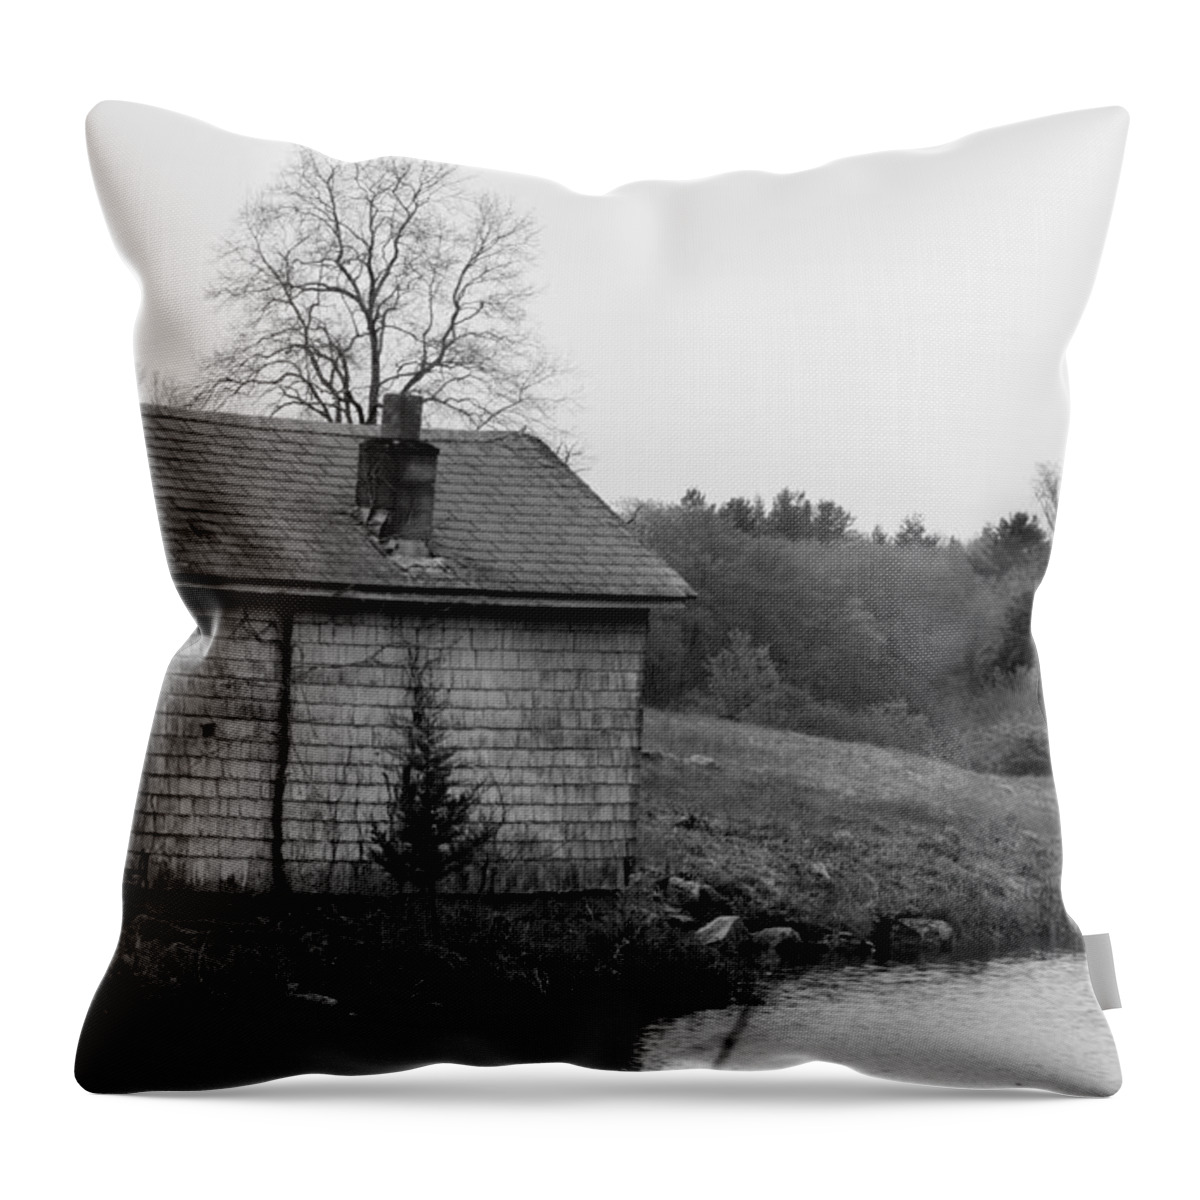 Well House Throw Pillow featuring the photograph Well House 1 by Kim Galluzzo Wozniak